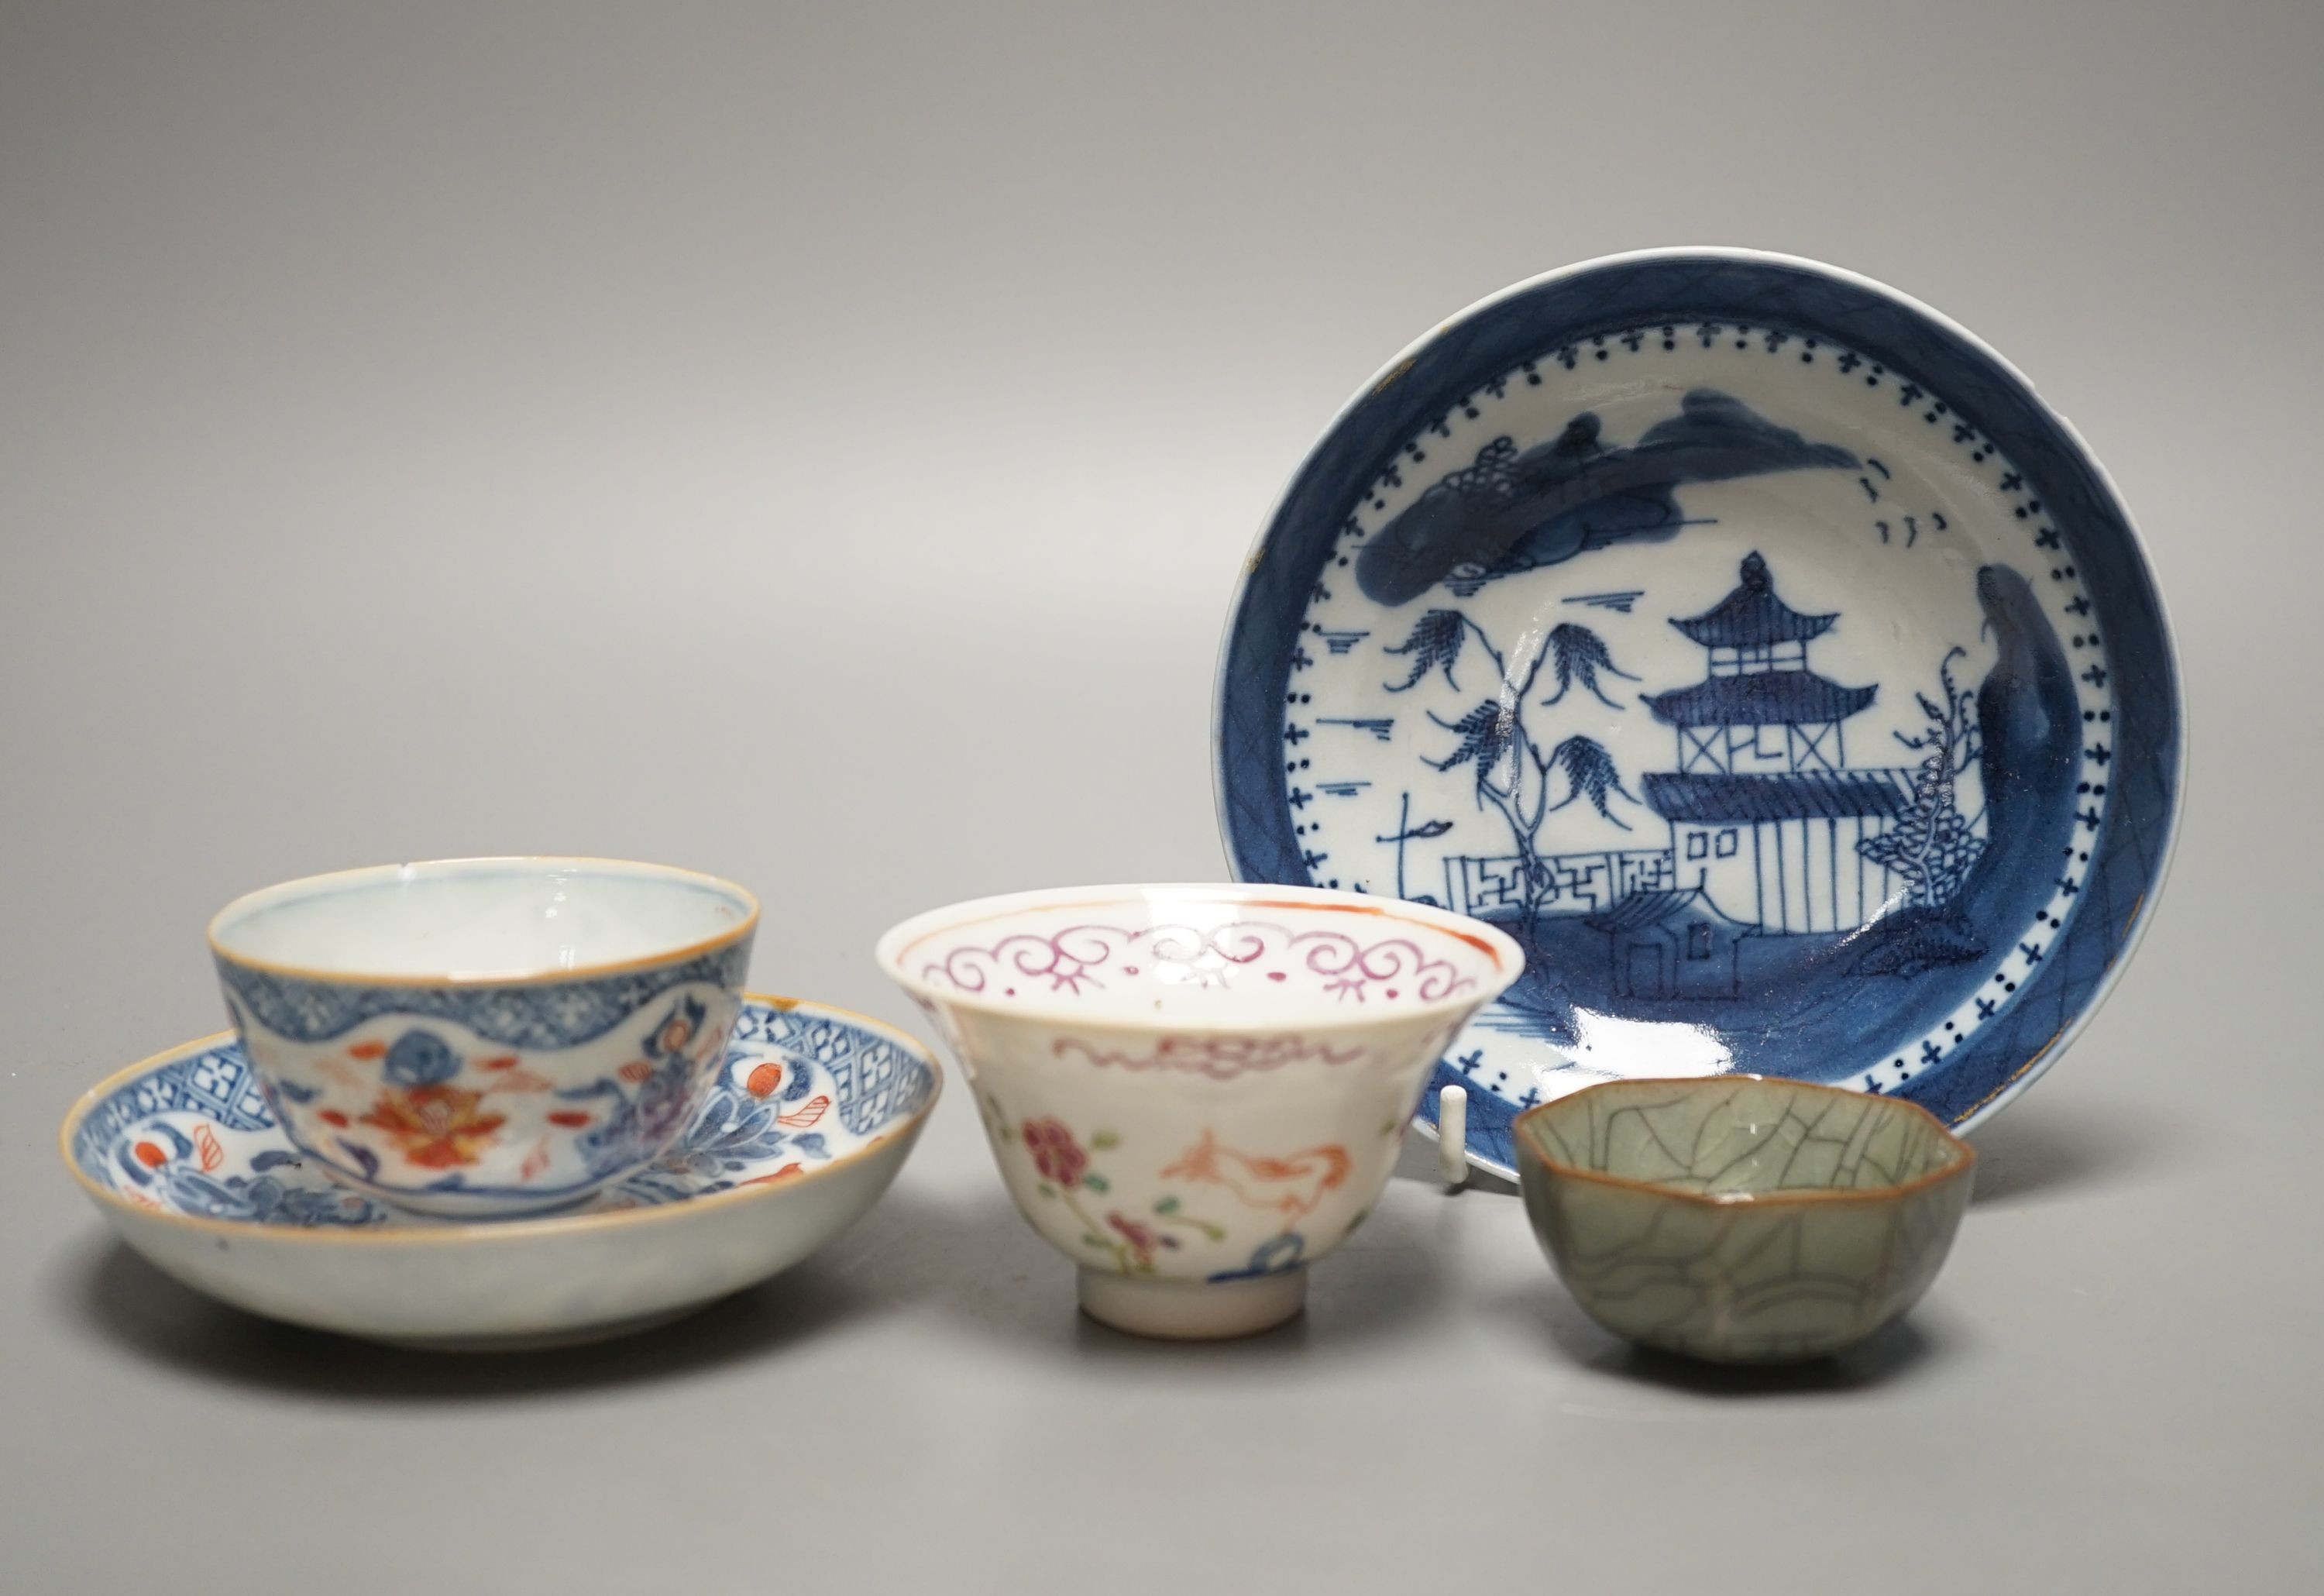 A Chinese Imari tea bowl and saucer, a famille rose tea bowl, a saucer and a celadon glazed cup